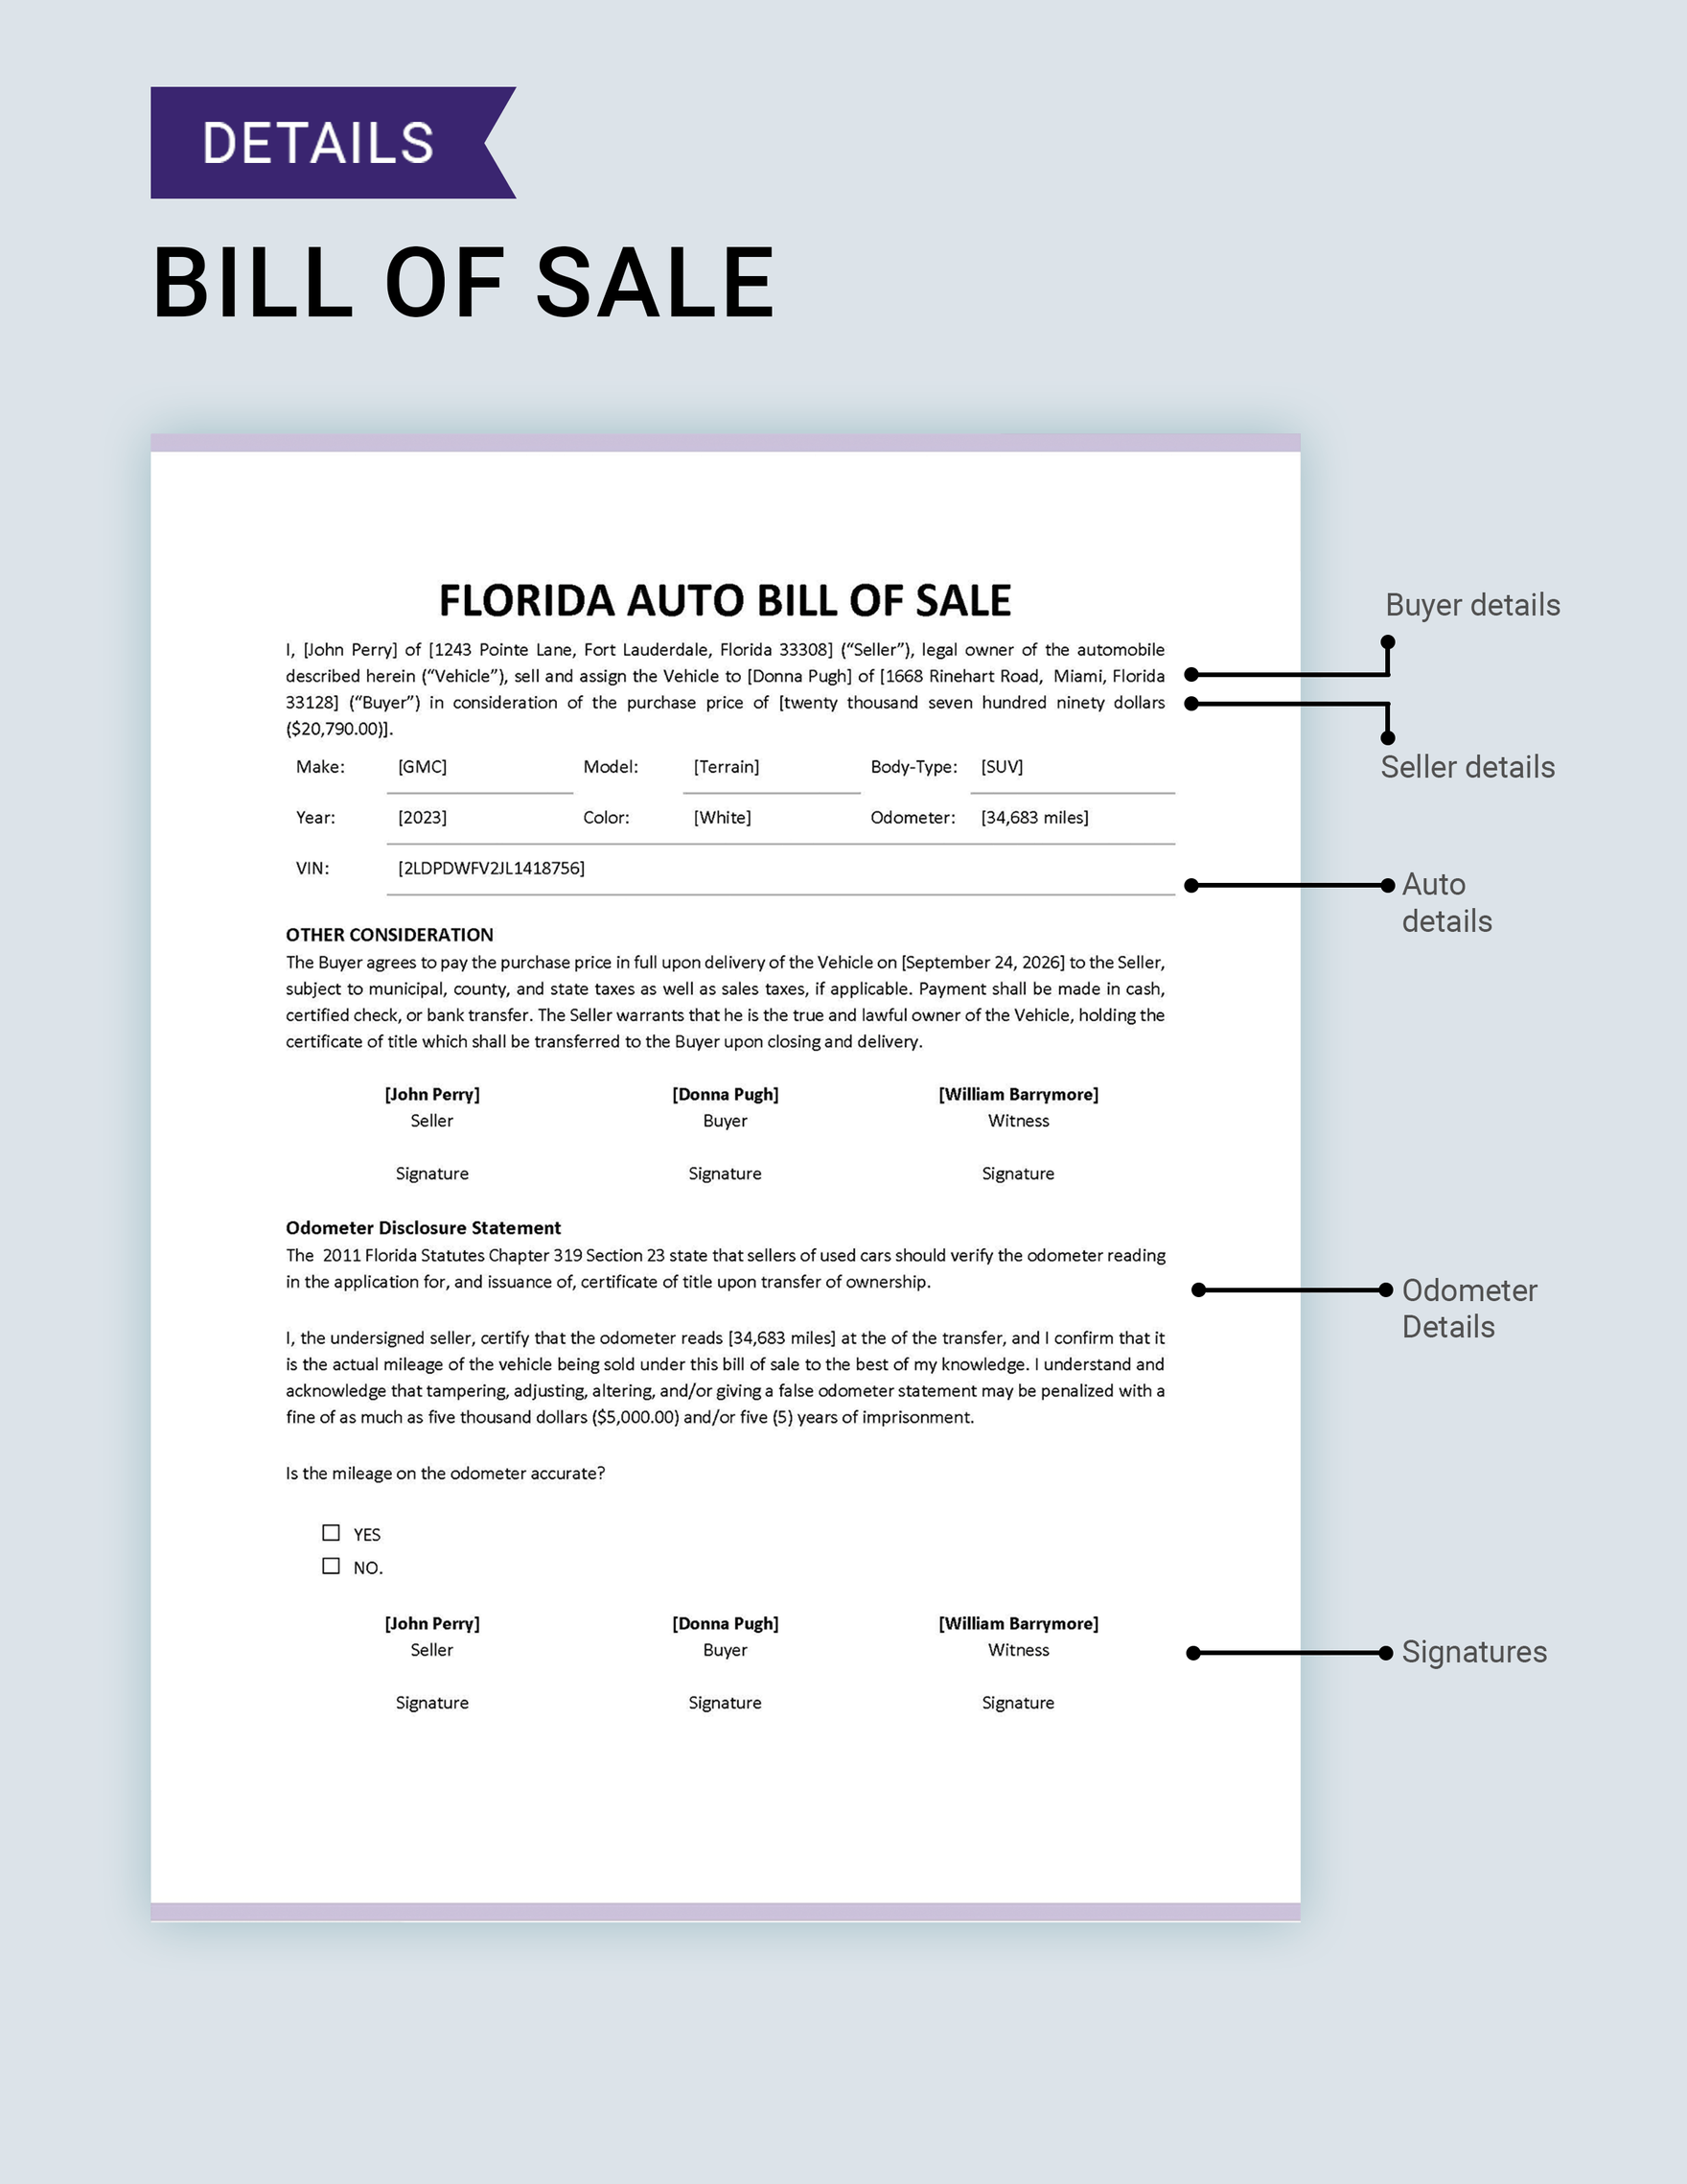 Florida Auto Bill of Sale Template Download in Word, Google Docs, PDF